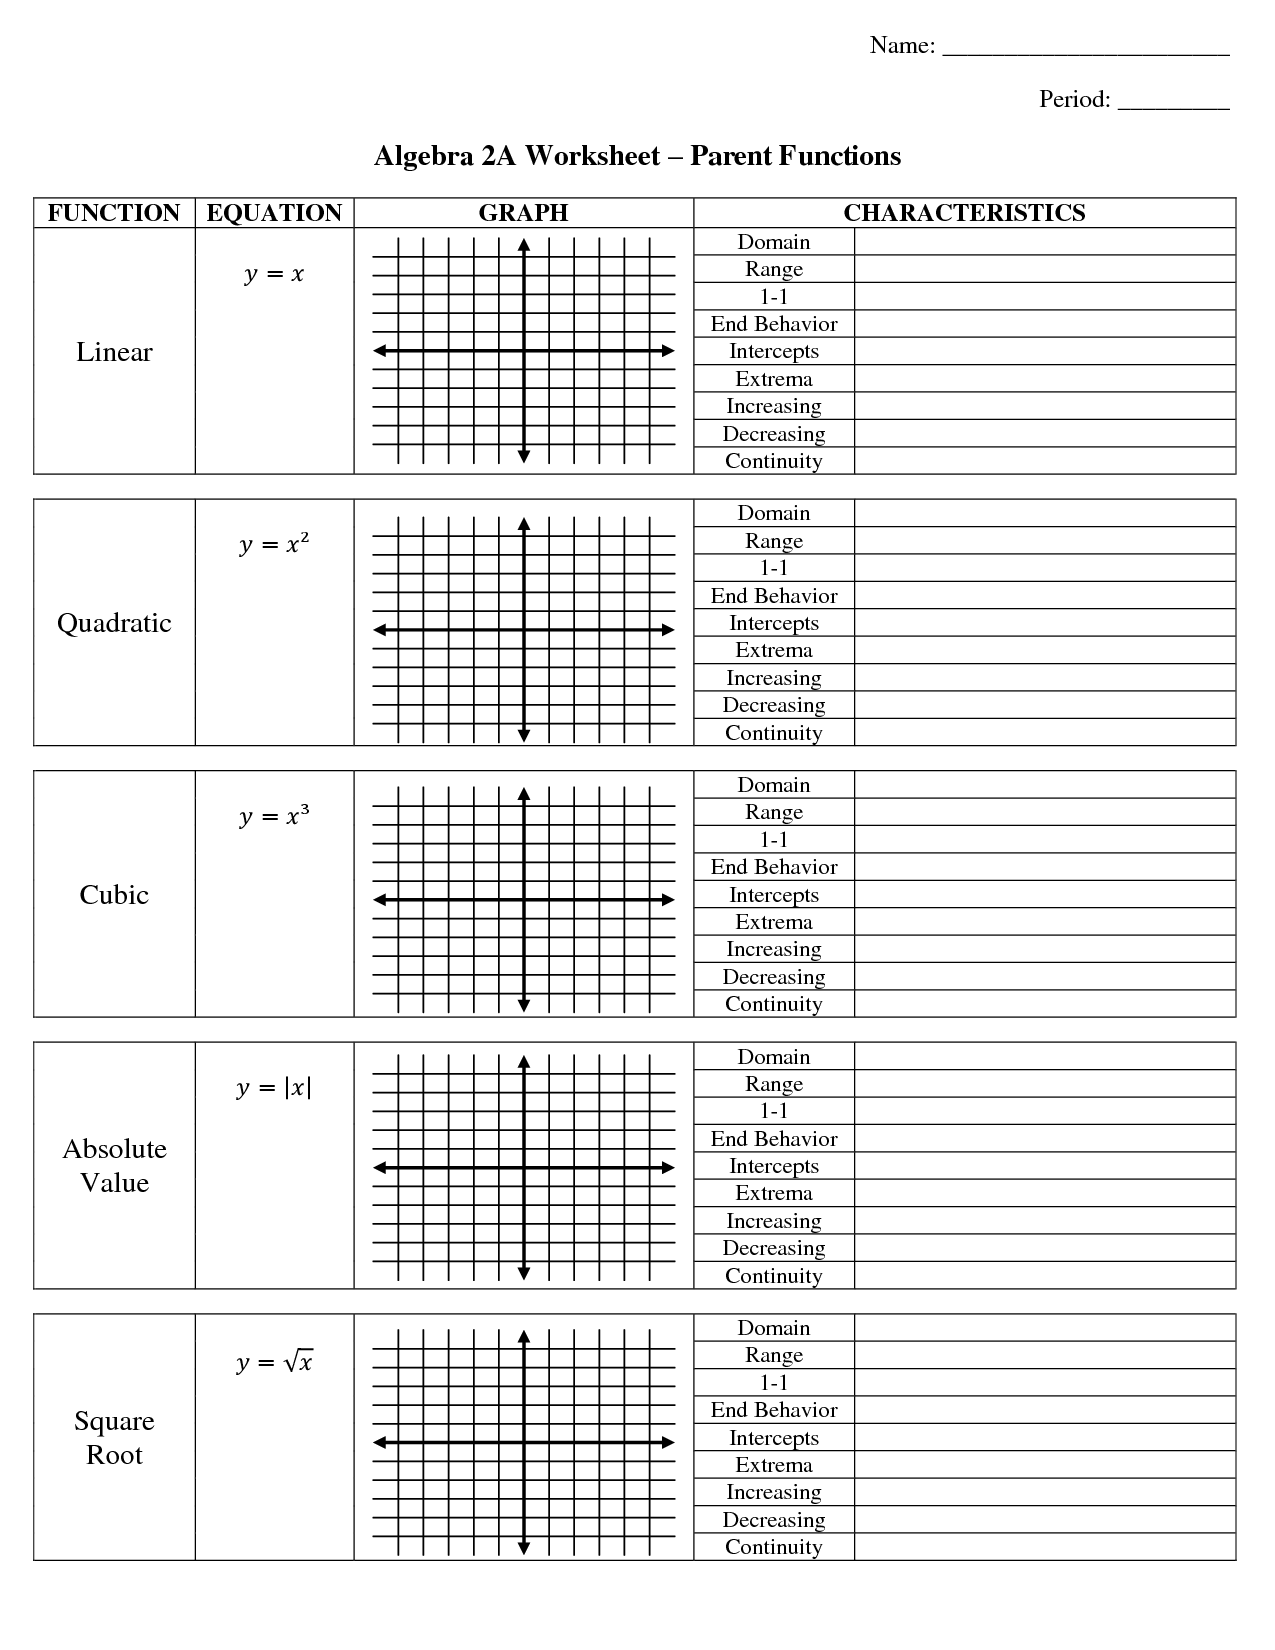 Albertville High Parent Function Transformations Worksheet With 